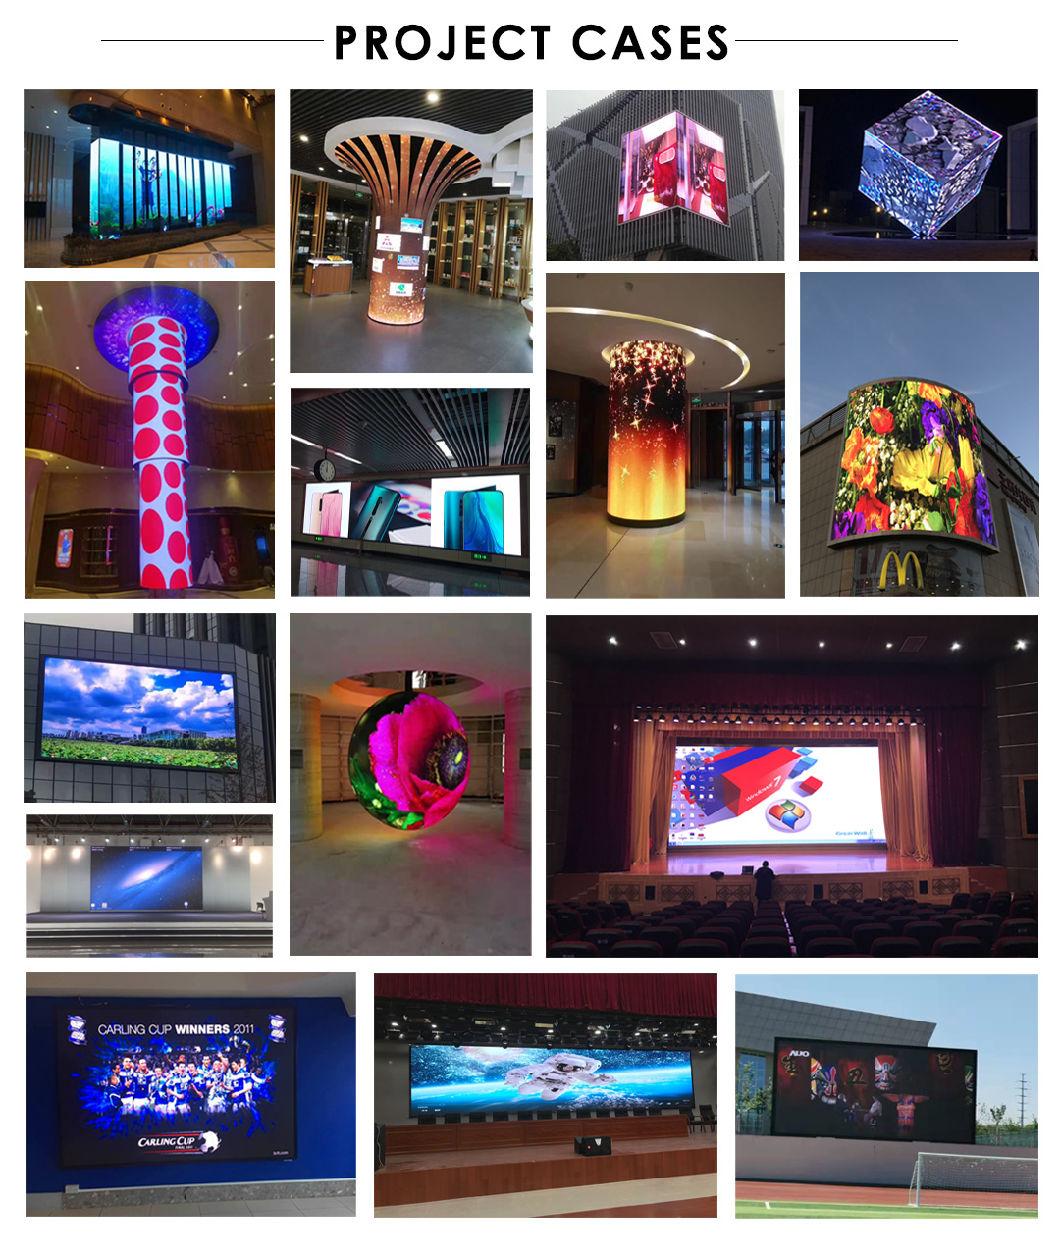 Clear Glass Transparent LED Display Advertising Screen P3.91-4.81